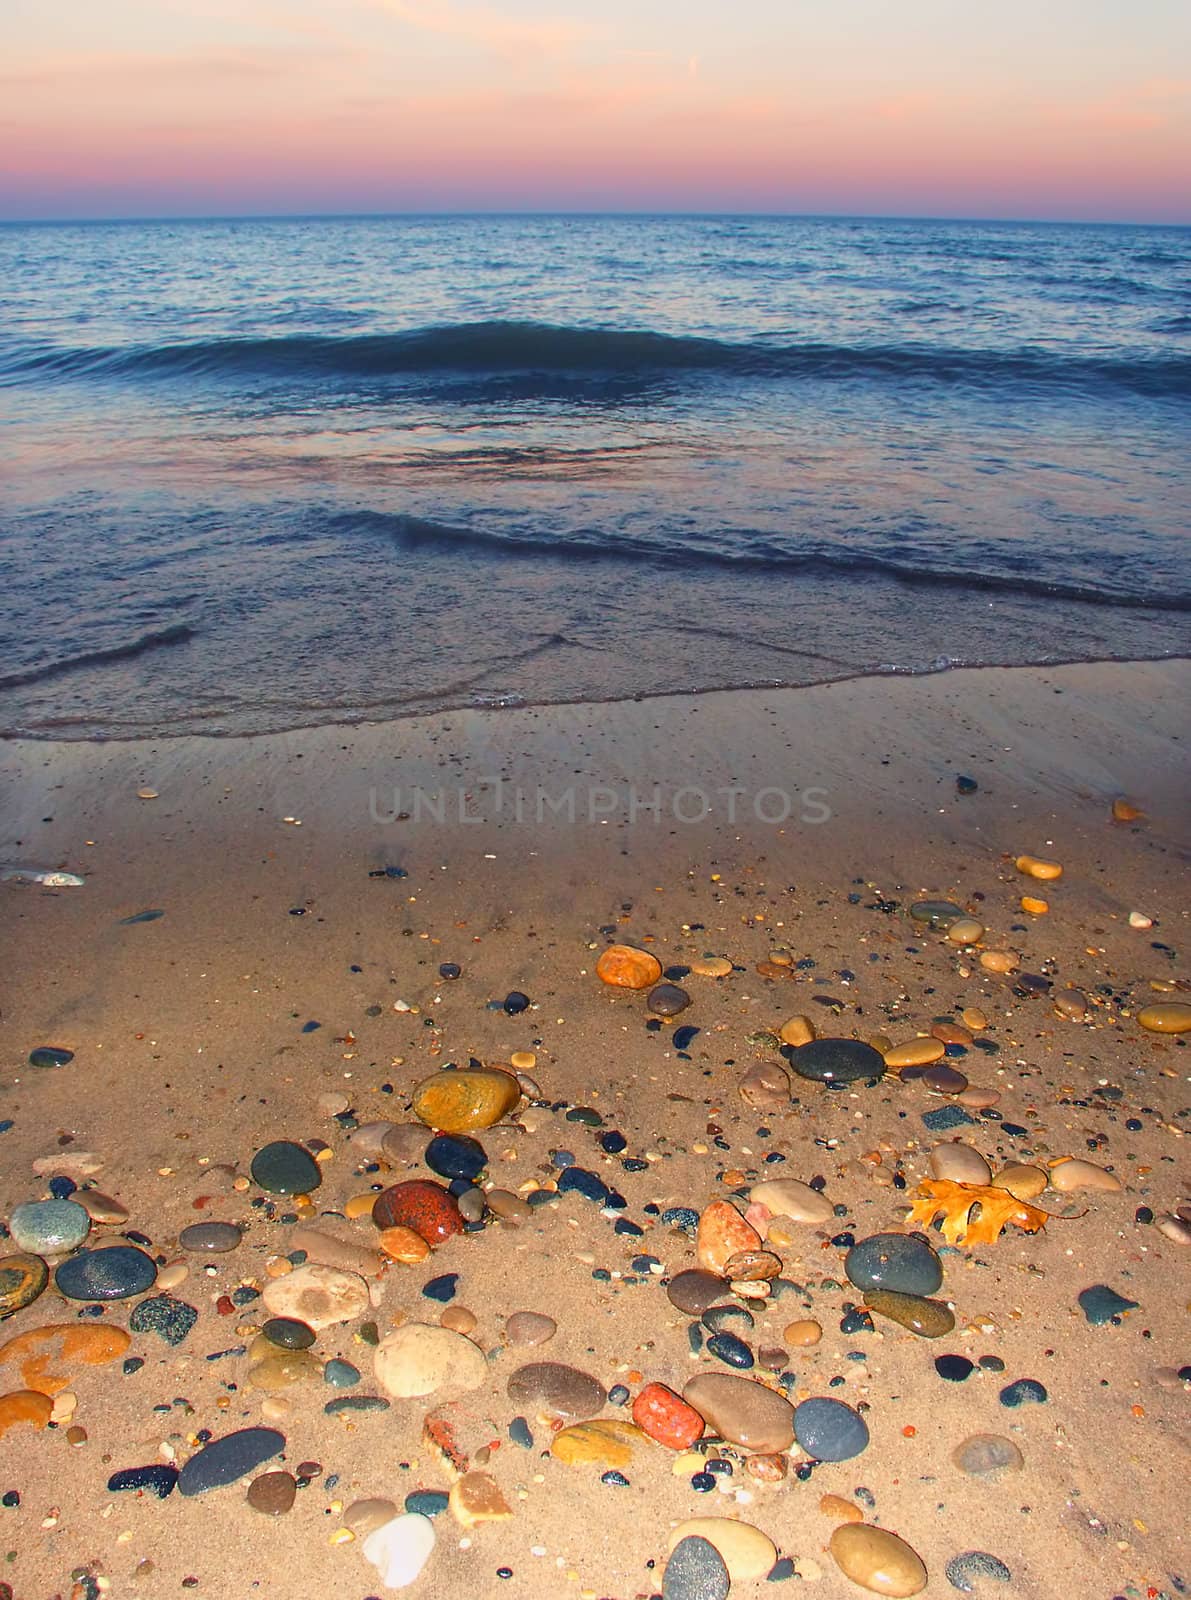 Smooth stones dot the sand at sunset over Lake Michigan at Illinois Beach State Park.